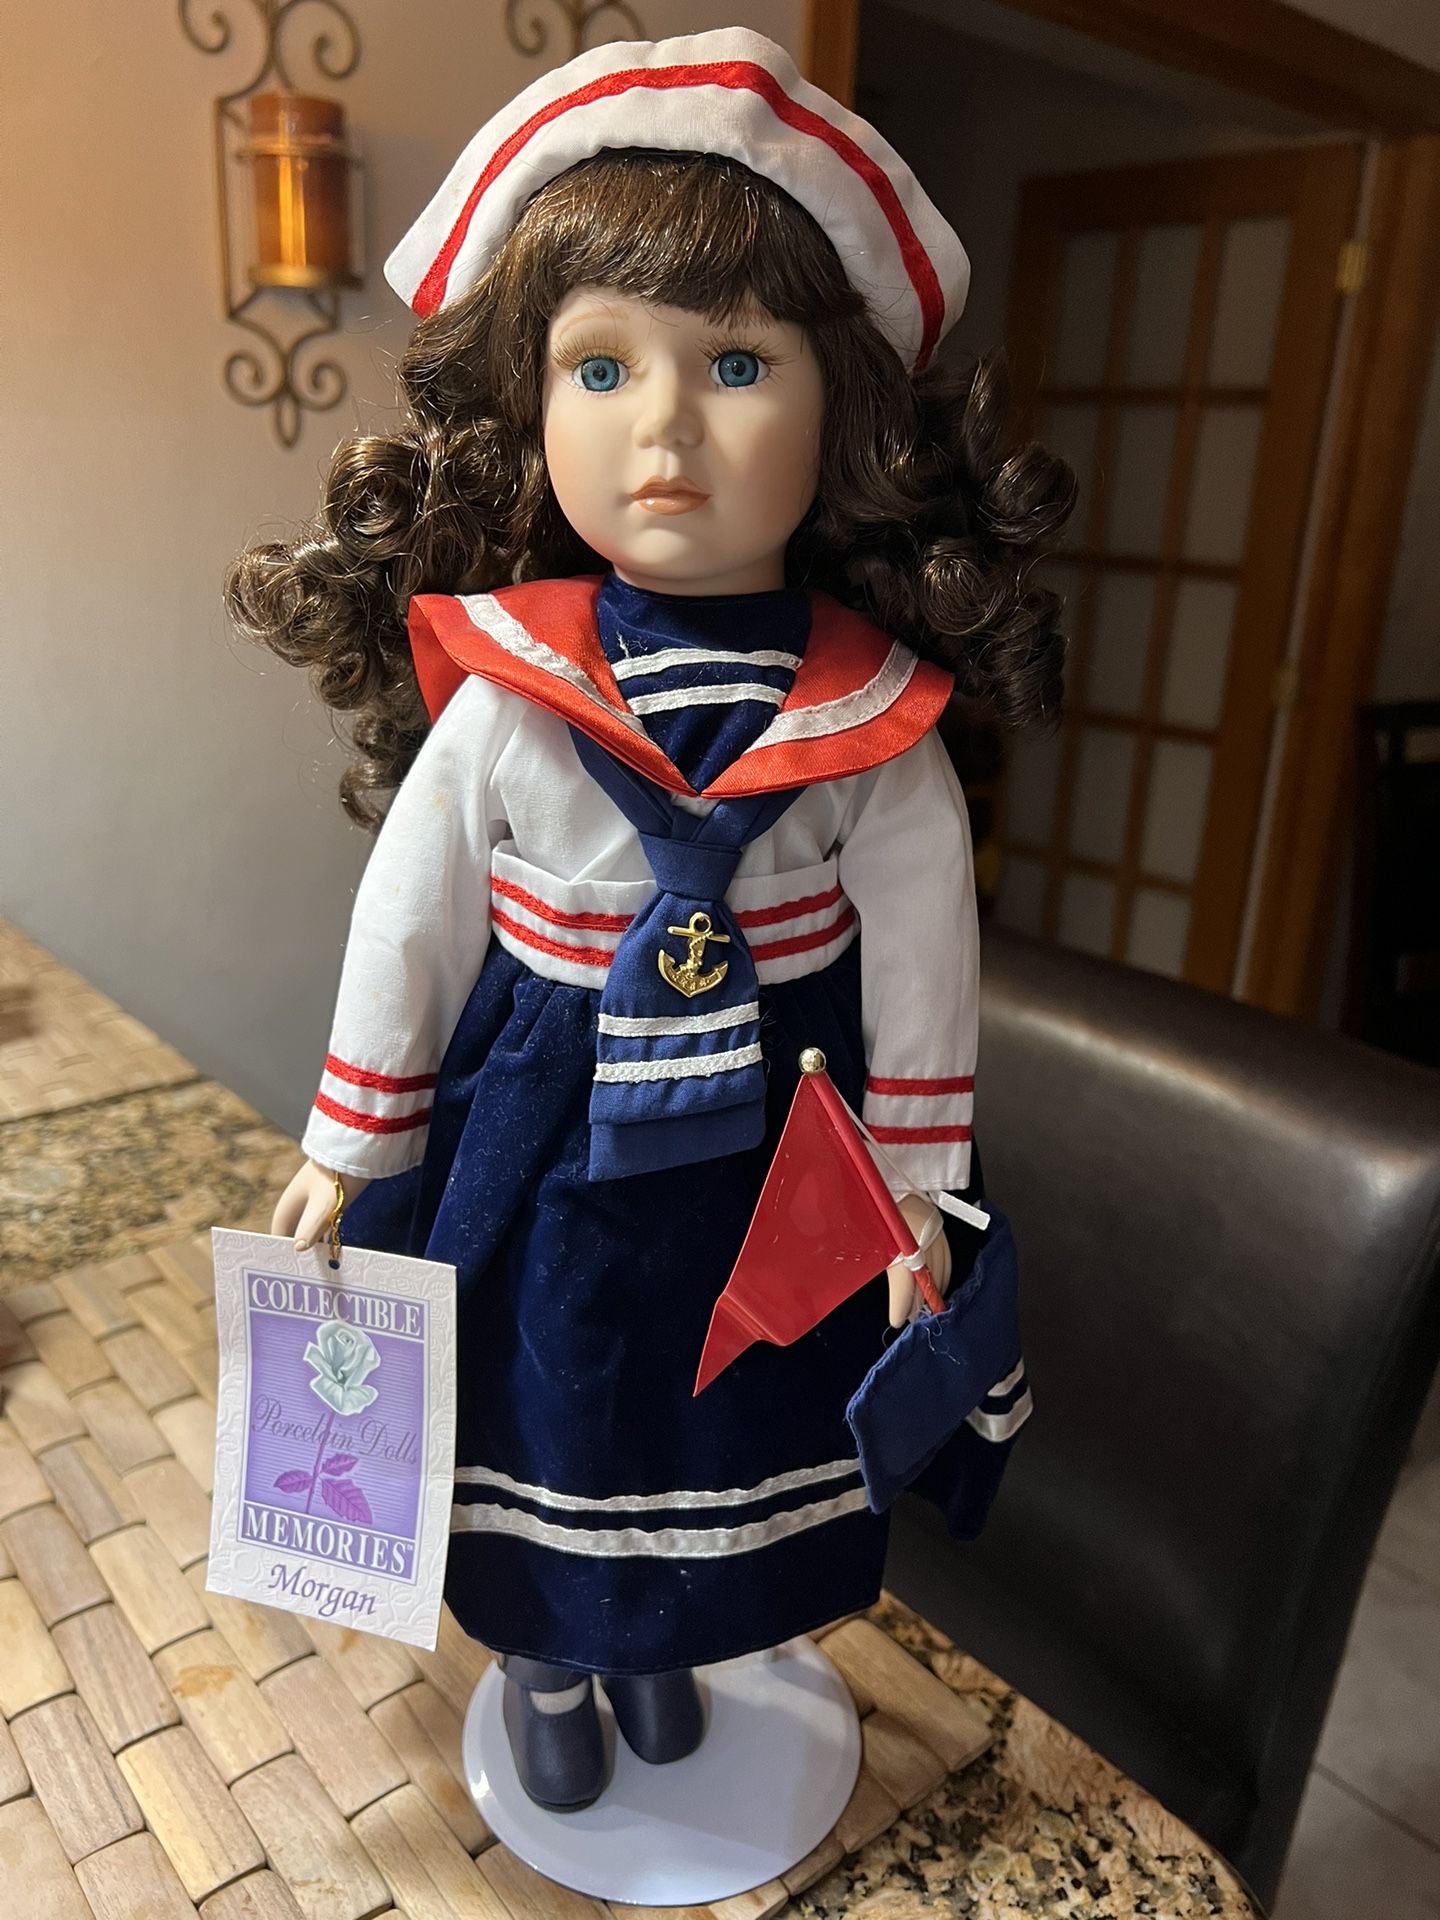 Collectable Memories Porcelain Doll